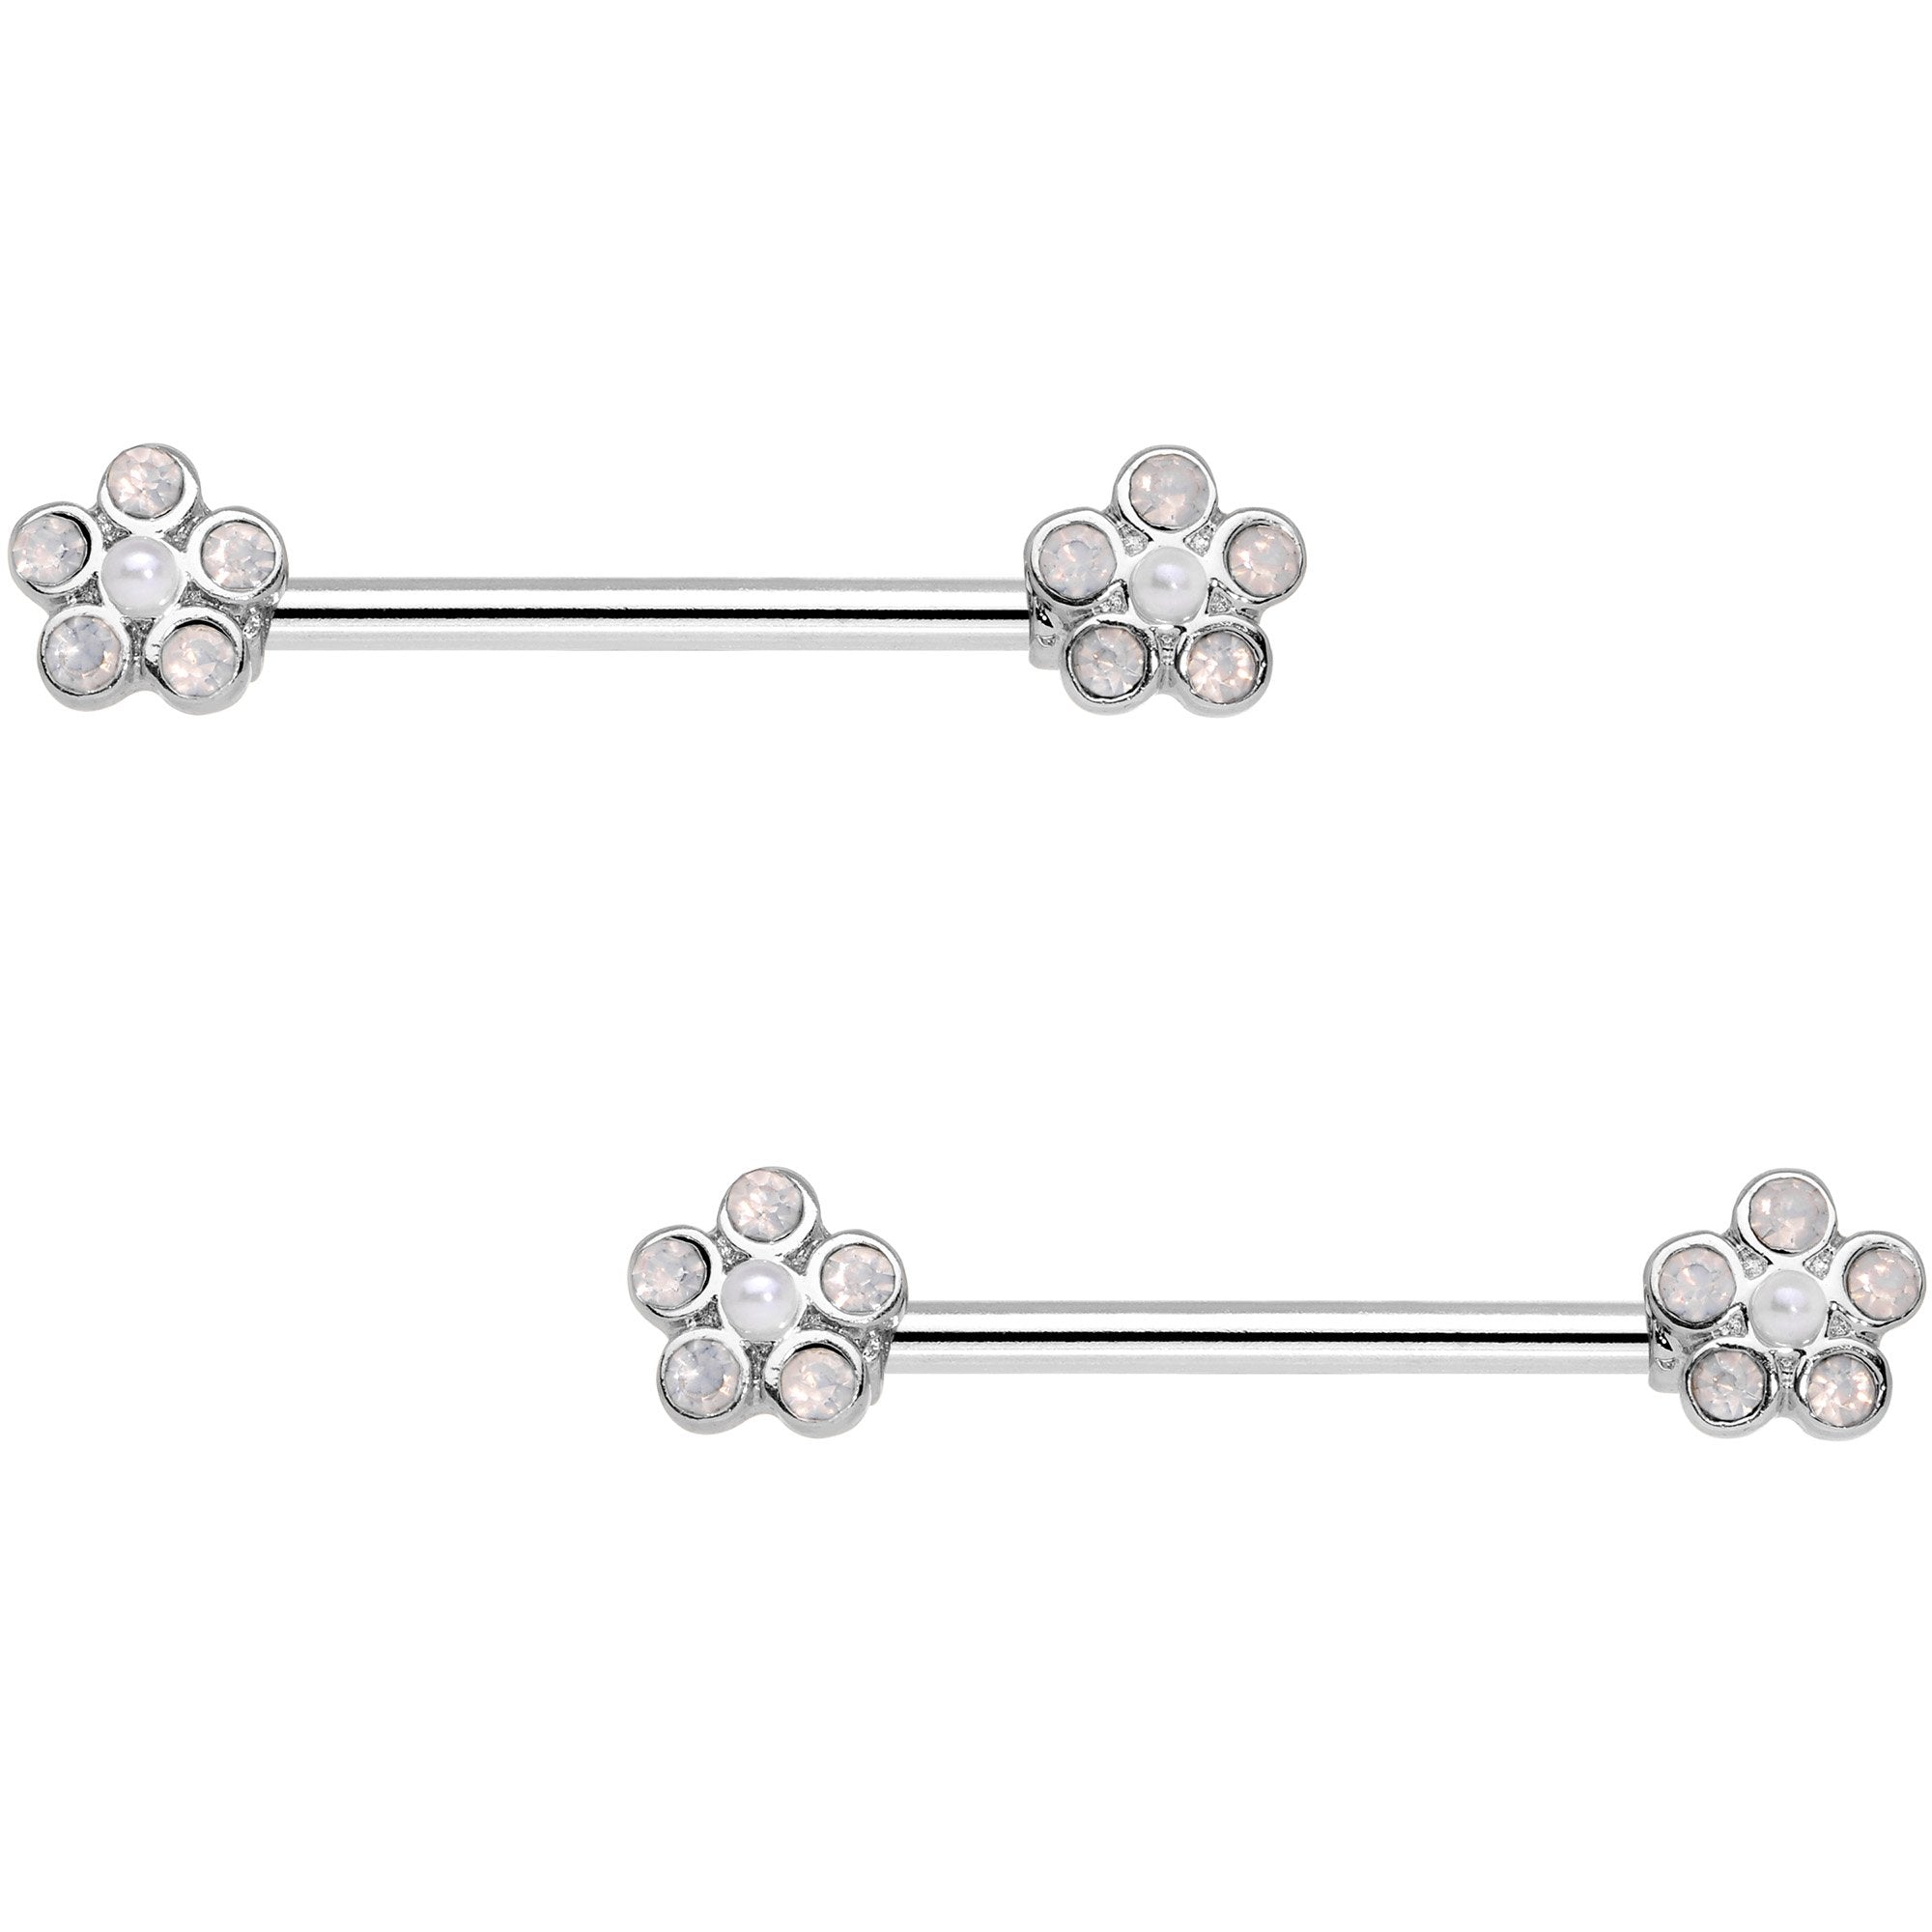 White Faux Opal Bubbly Flower Barbell Nipple Ring Set